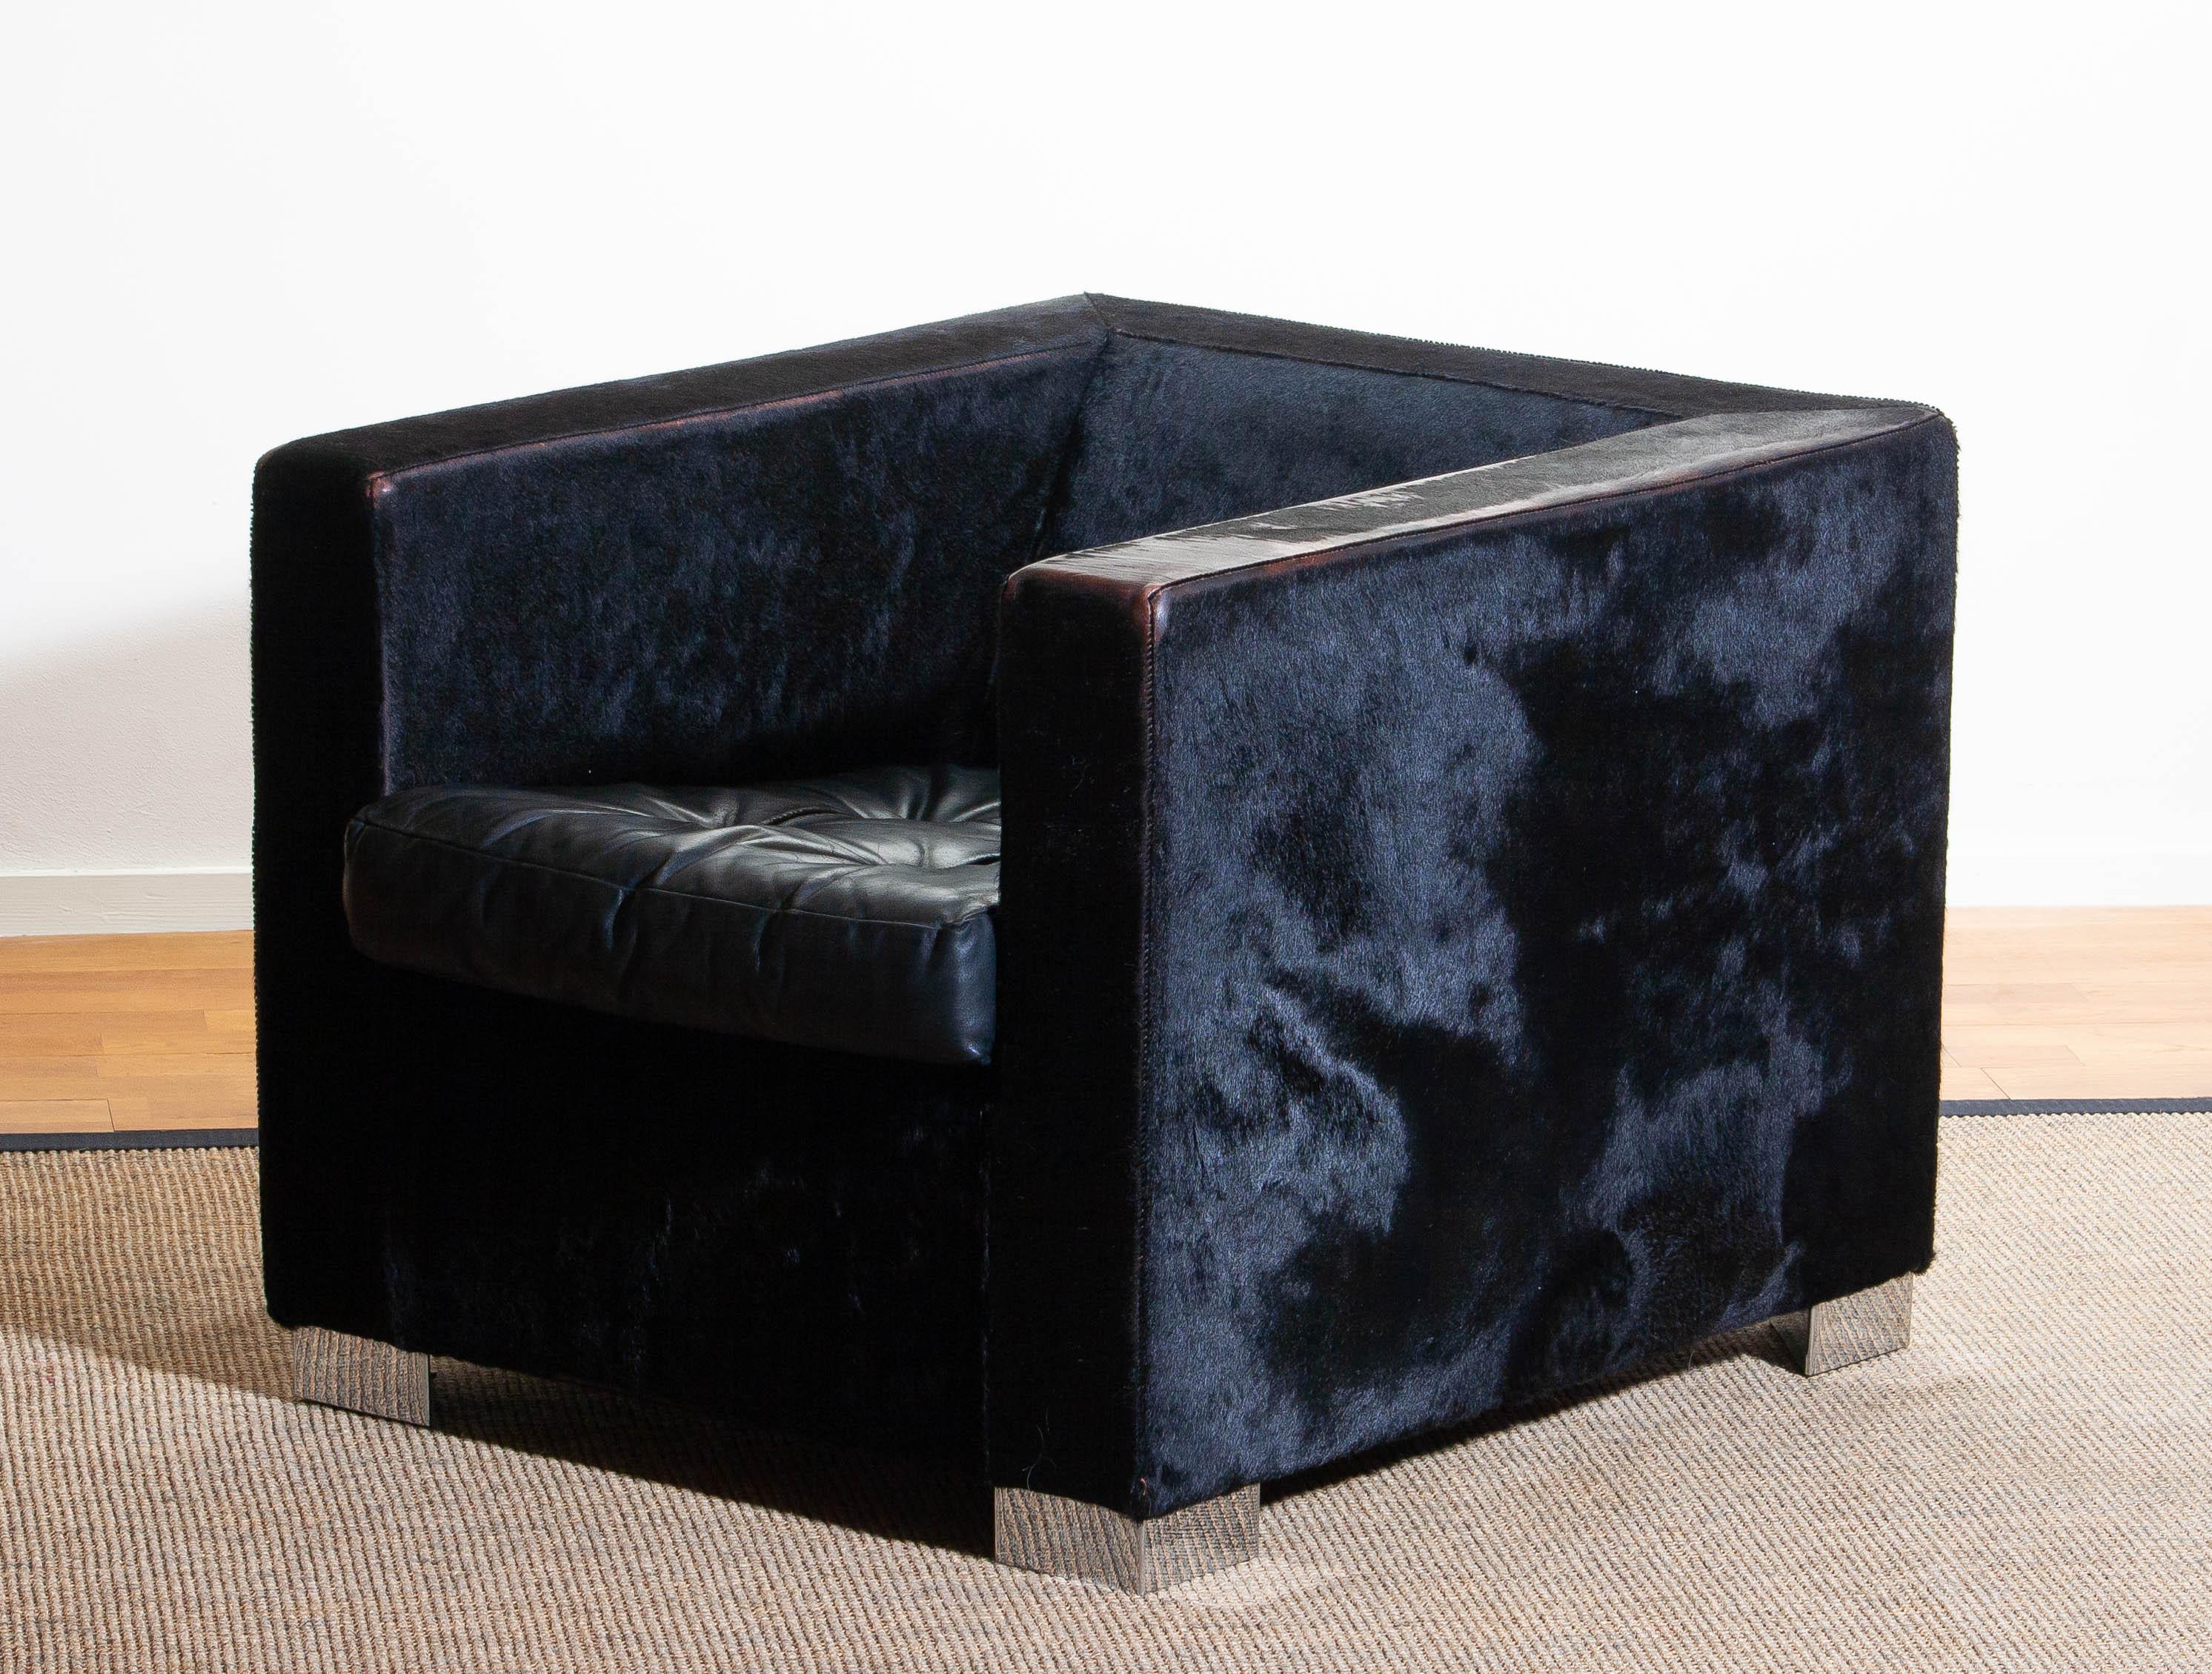 1990. Contemporary “Suitcase” armchair designed by Rodolfo Dordoni for Minotti. 
Upholstered with black pony and the padded seat cushion, also black, is upholstered with leather.
Standing on squared chromed metal legs.
The overall condition is